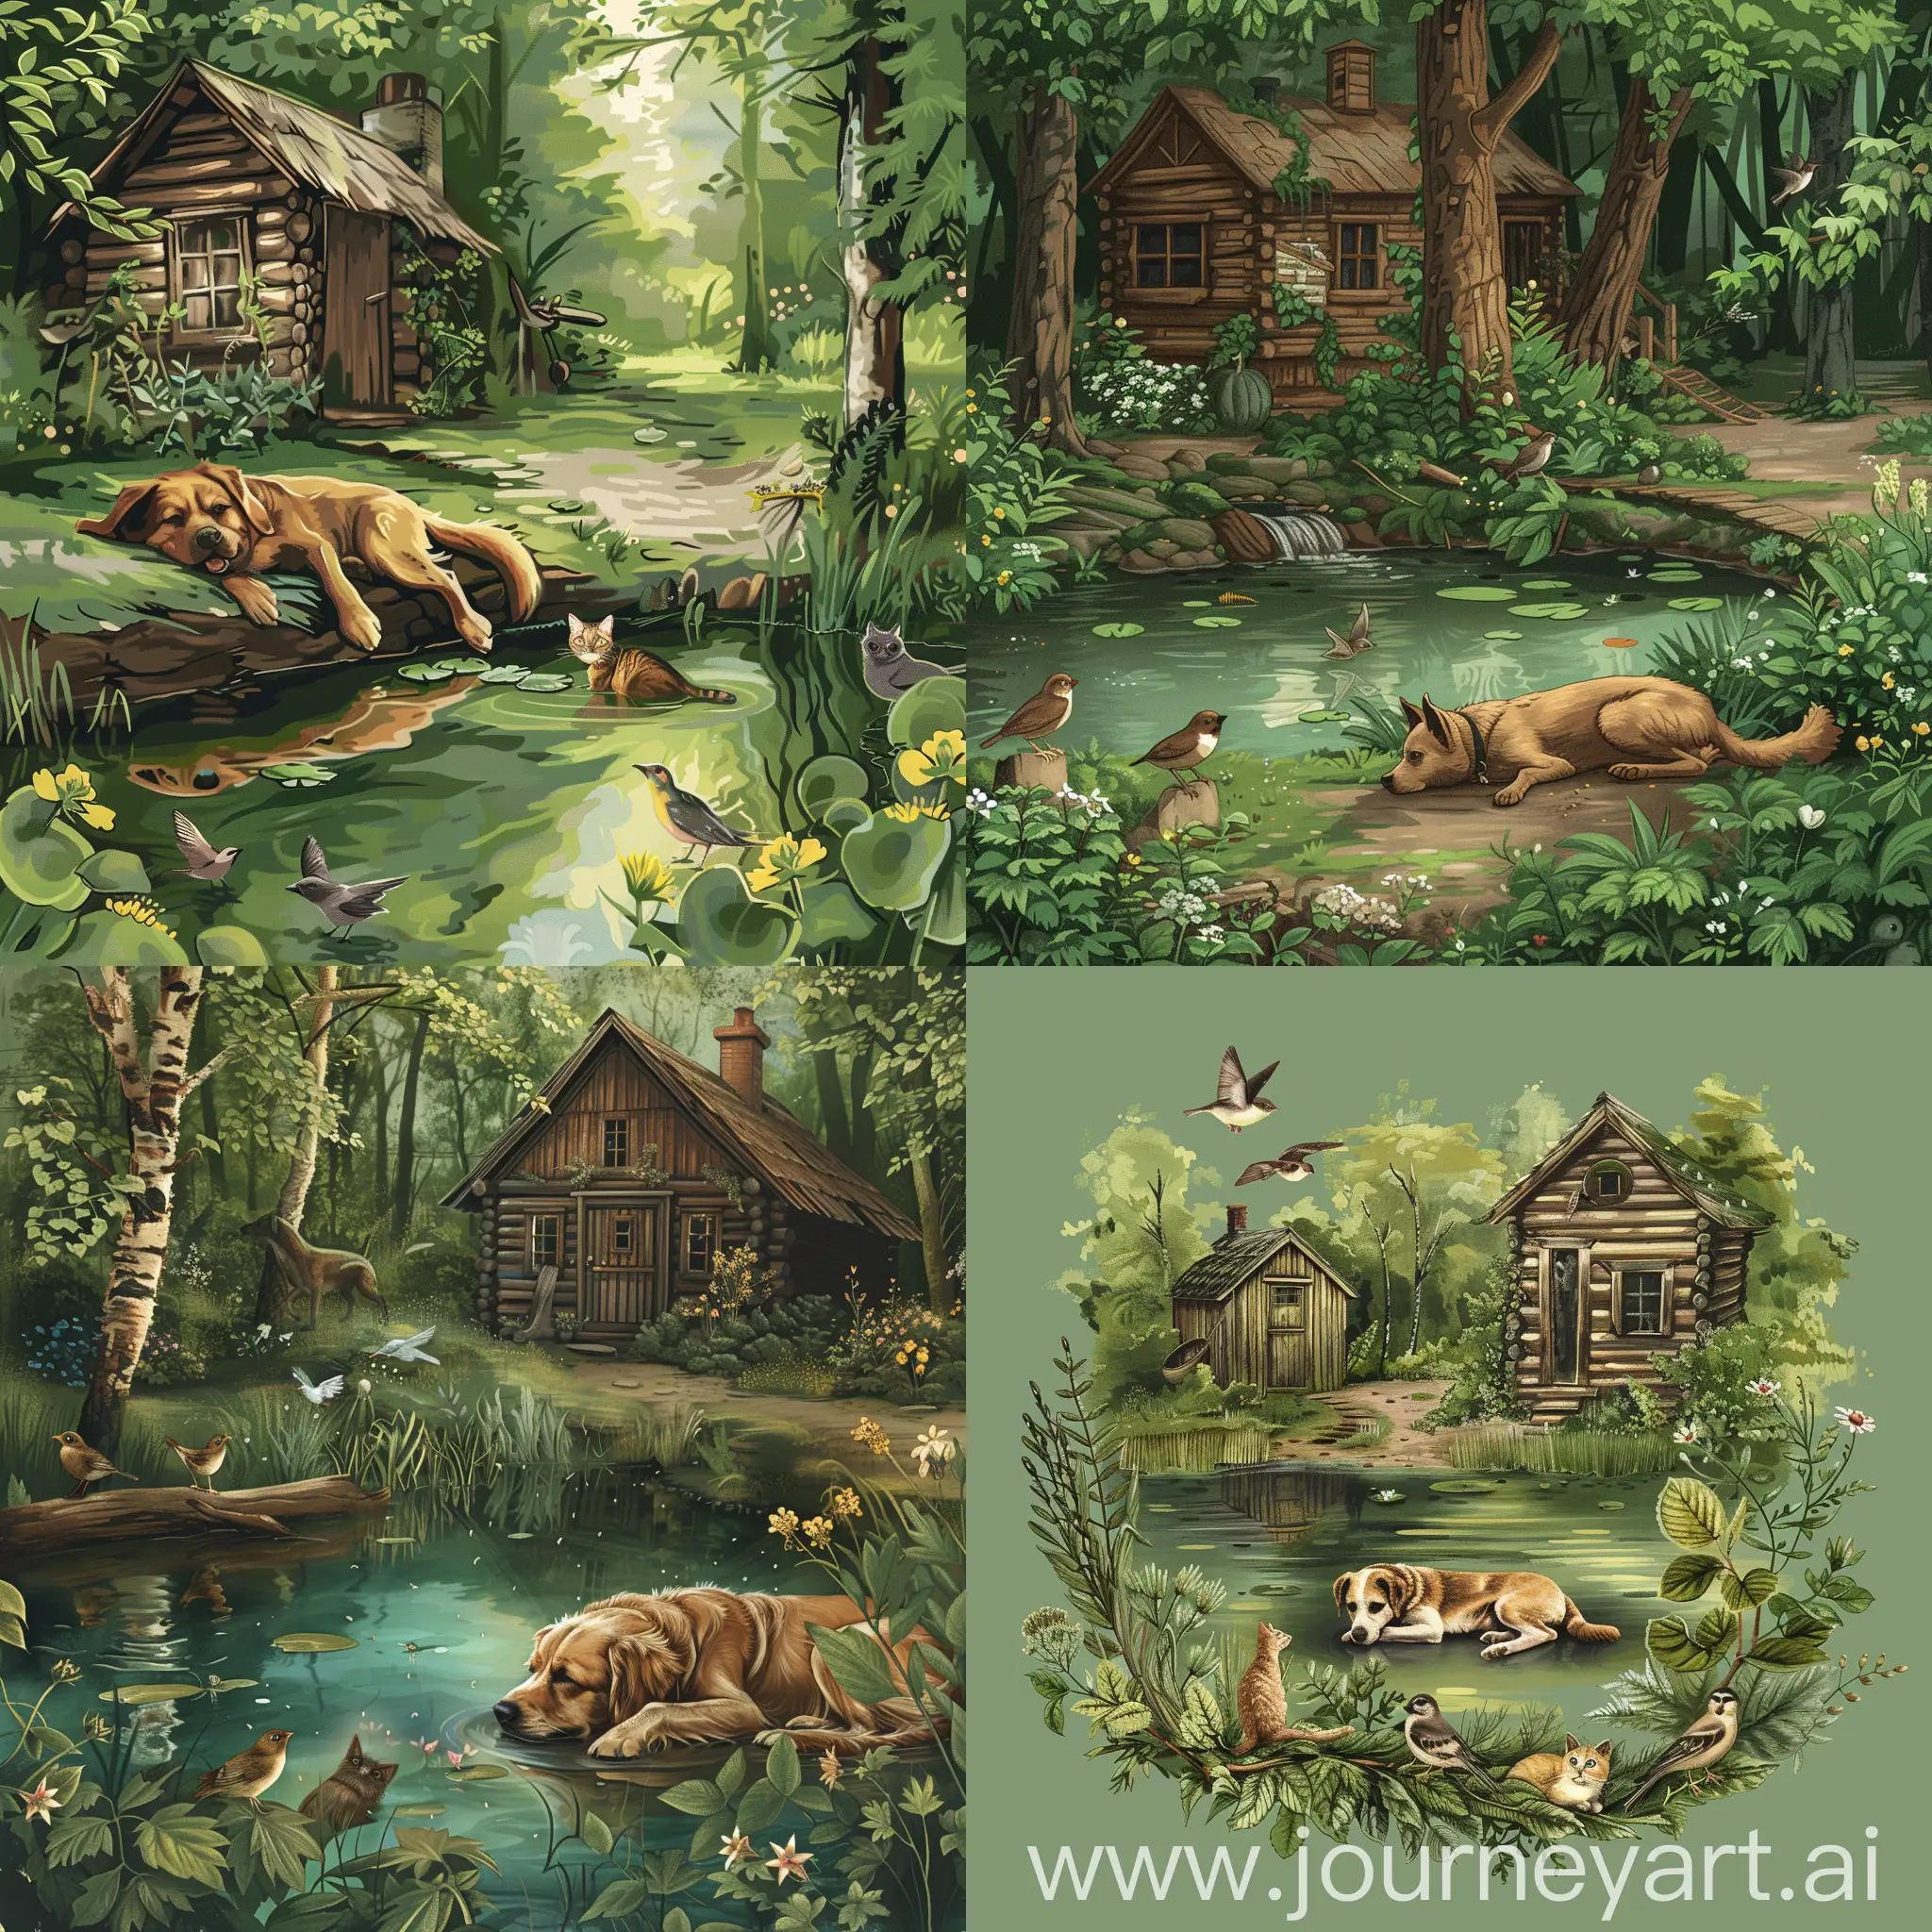 "I intend to create an NFT design using artificial intelligence. The type of image is digital painting and digital collage art.  Description of my desired design: The image I have in mind for this NFT is of a dog resting by a pond, surrounded by greenery, birds, a cat, and a wooden cabin. It symbolizes peace, tranquility, and harmony with the environment. The dog represents loyalty and intimacy, while the pond symbolizes serenity and tranquility. The cat and birds symbolize life and interdependence among animals in the environment, and the wooden cabin symbolizes the connection between humans and nature, and a simple, natural life. My goal is to sell to those who support environmental protection and animal rights, as well as those who participate in conferences and seminars related to animal rights.  The color pattern I have in mind for this design includes the following: Natural Green: 